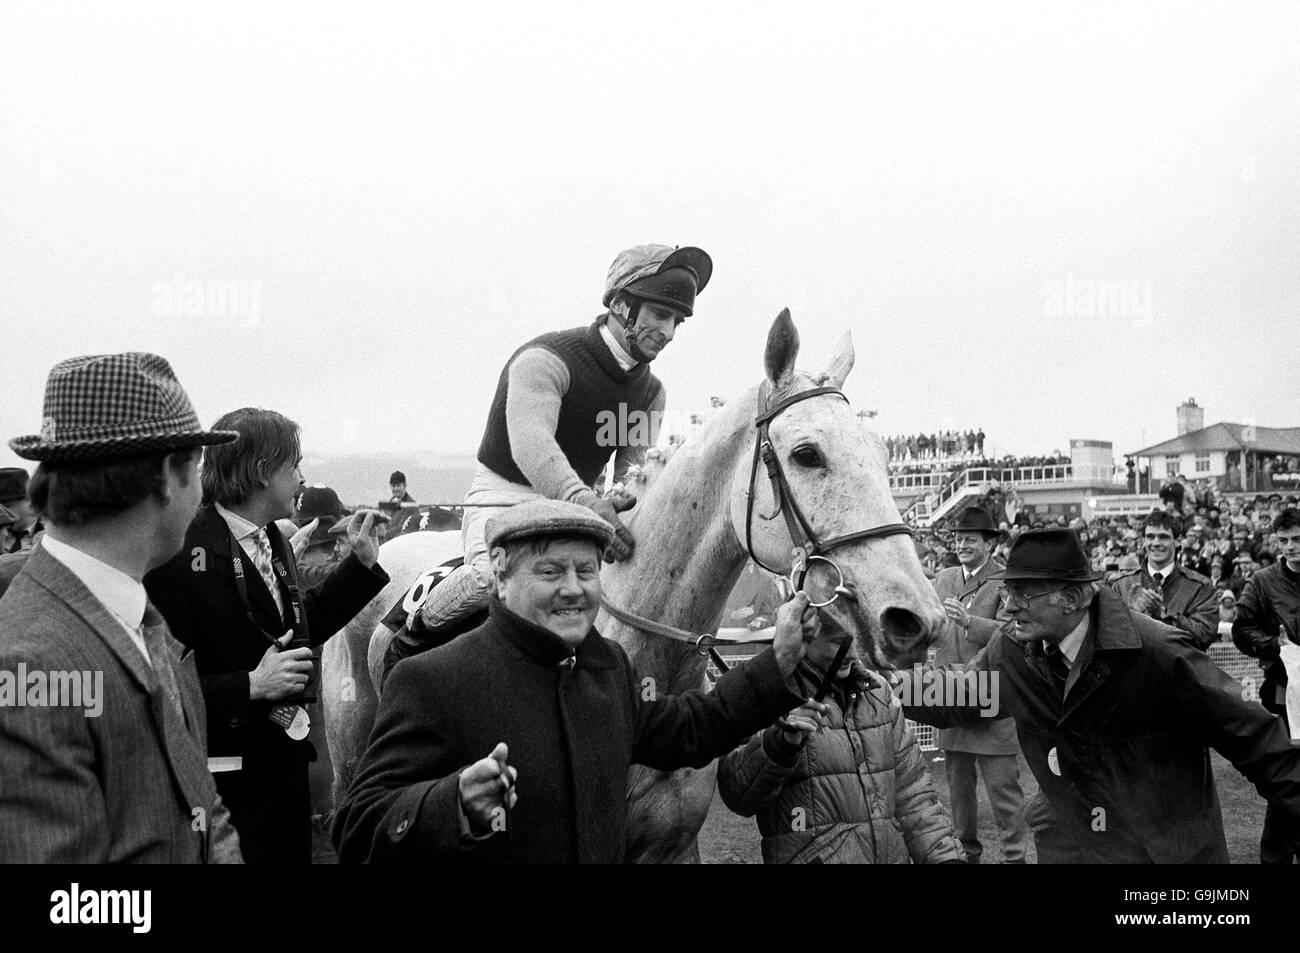 Desert Orchid - Tote Gold Cup Stock Photo